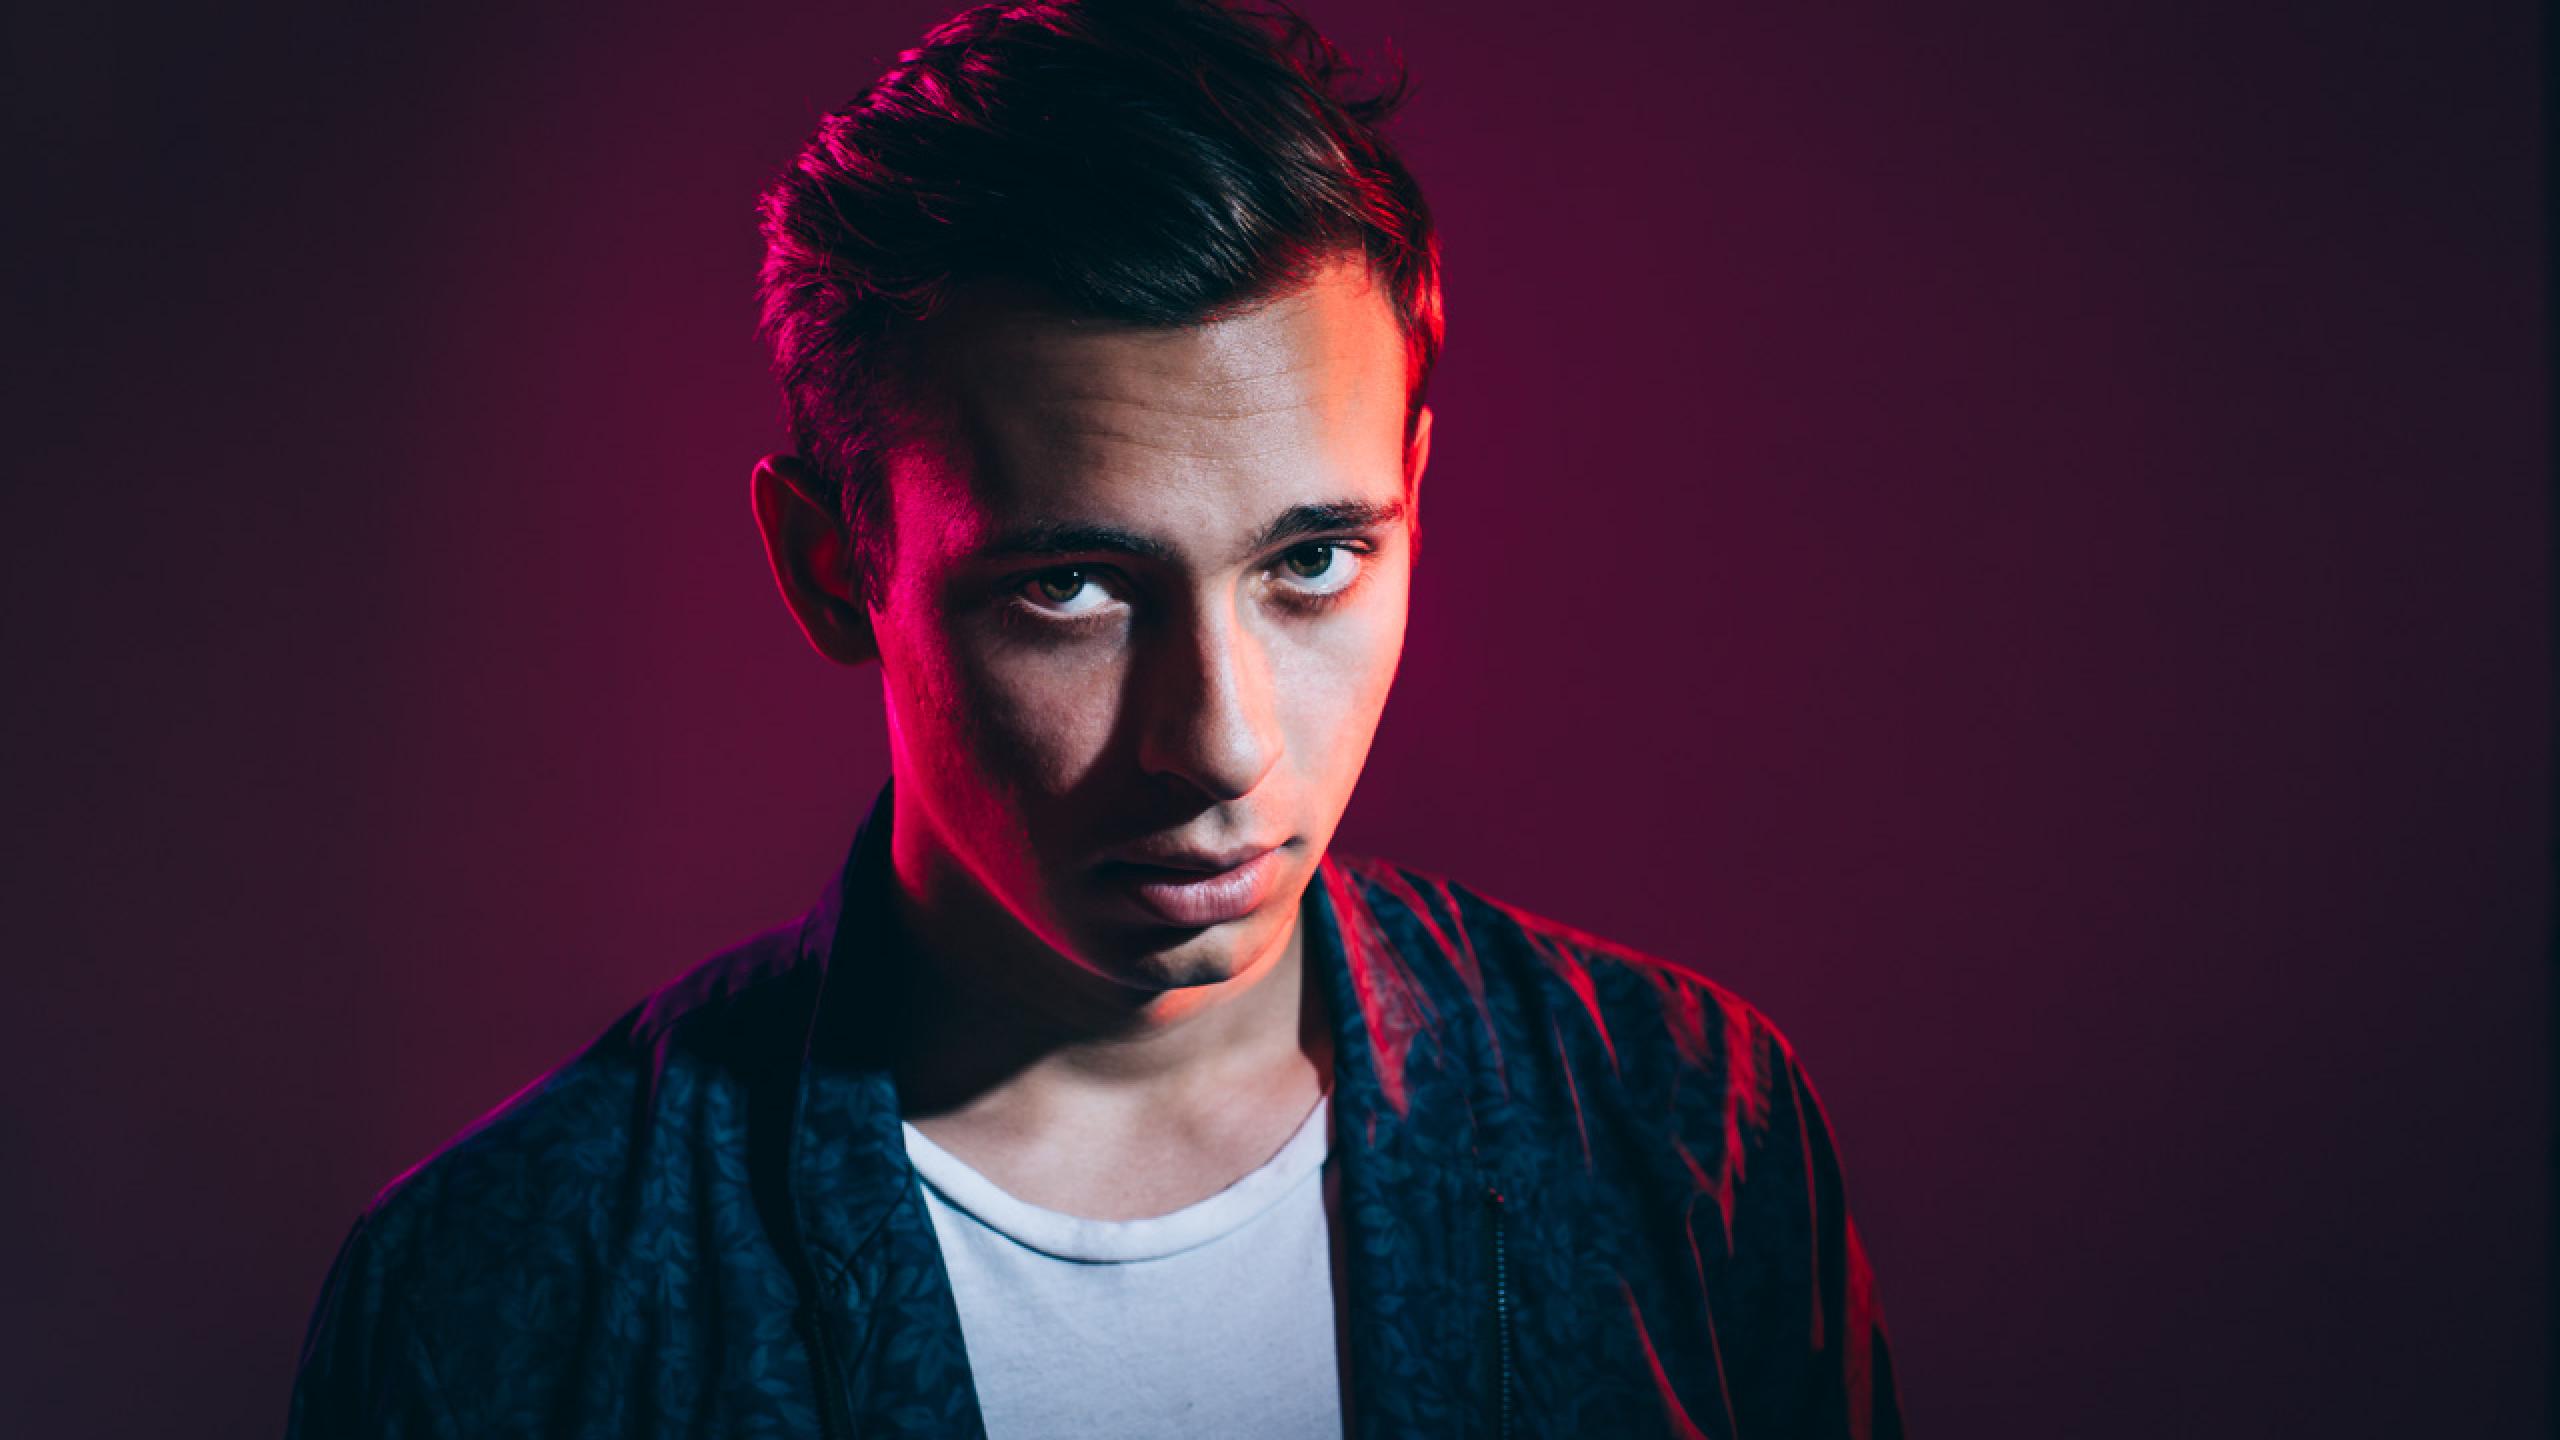 flume-tour-dates-2022-2023-flume-tickets-and-concerts-wegow-united